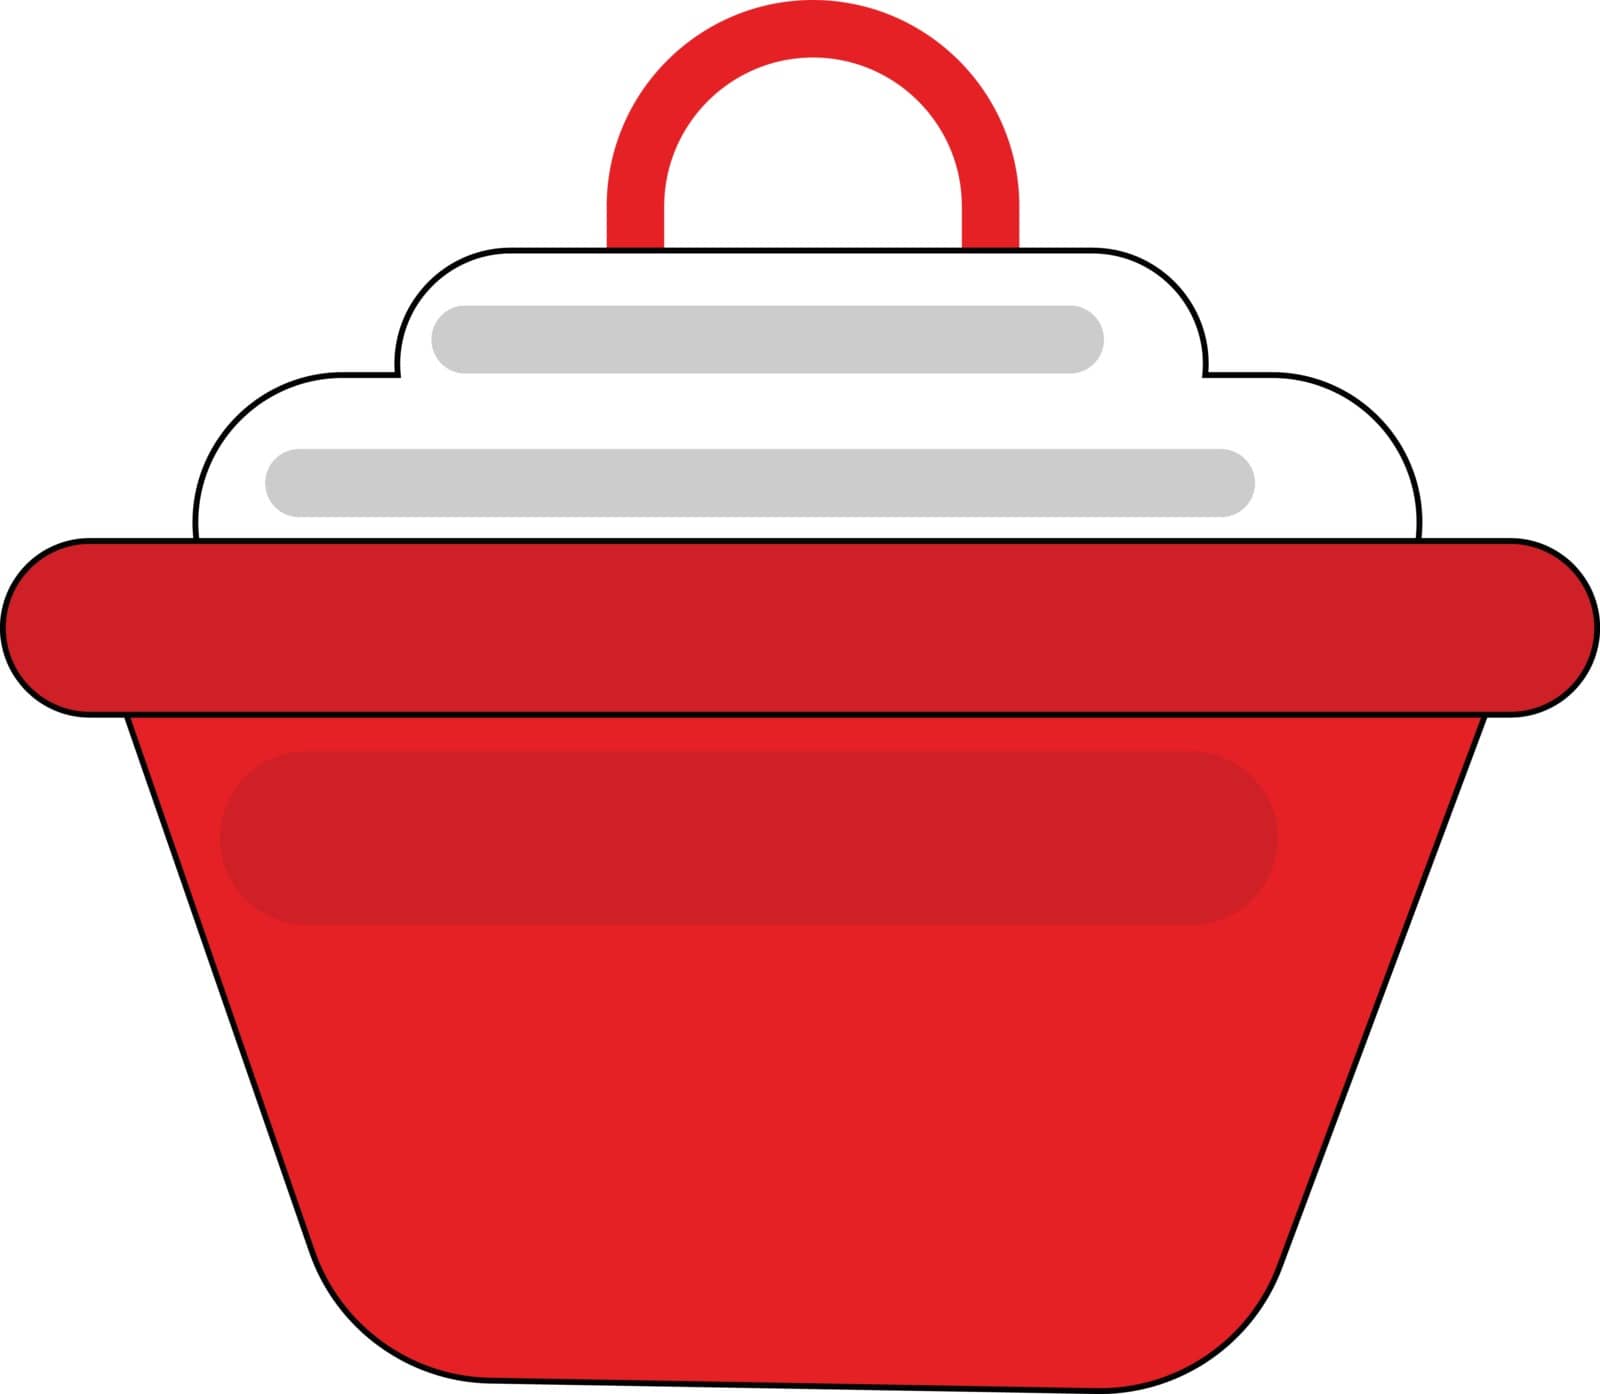 Clipart of a red-colored non-stick saucepan provided with a whit by Morphart